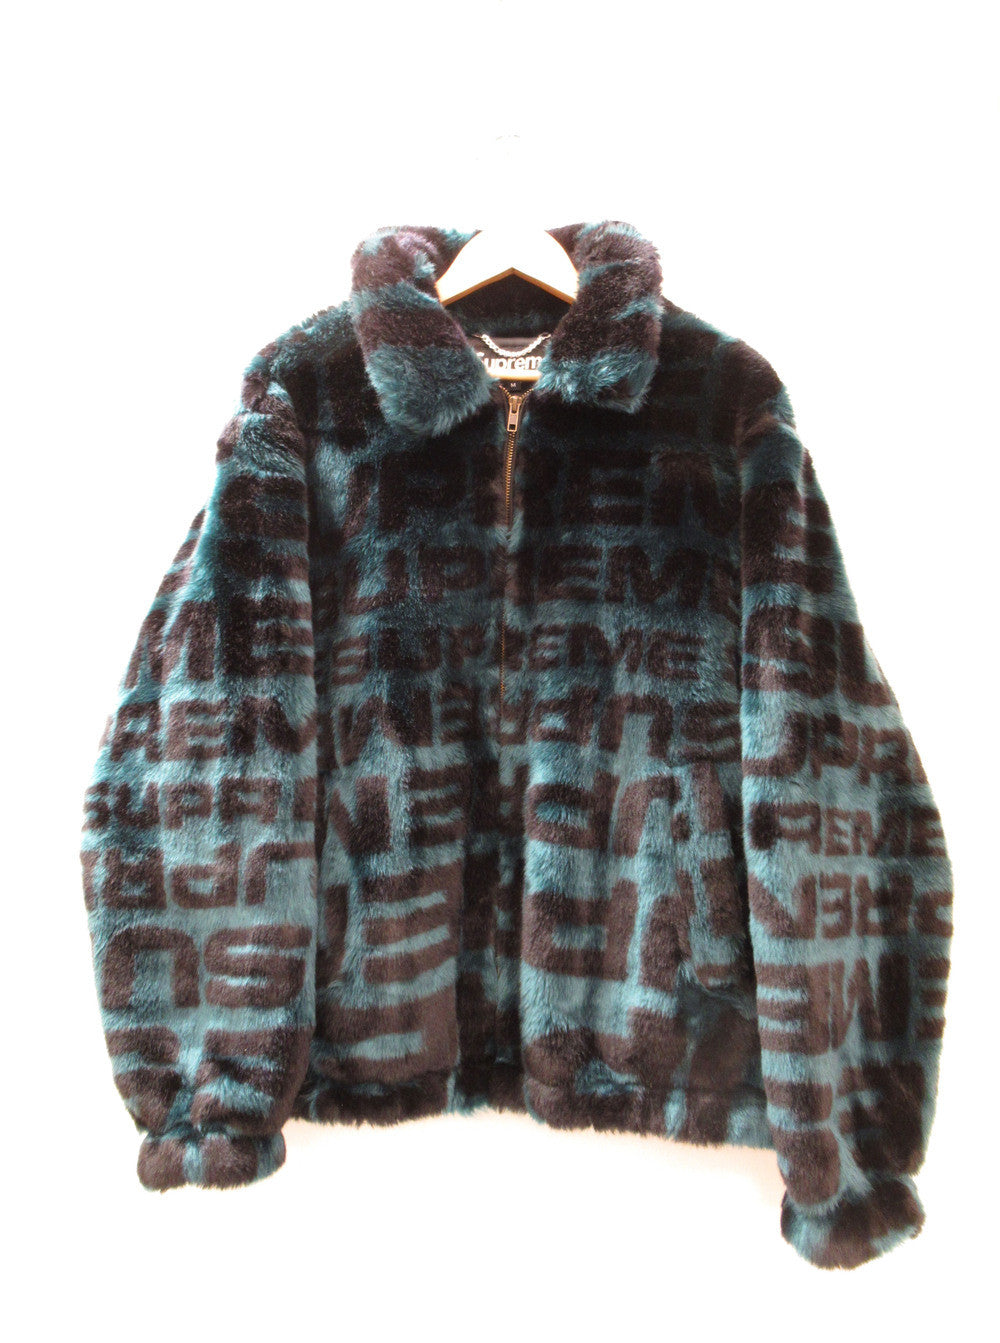 Supreme Faux Fur Repeater Bomber Jacketブルゾン